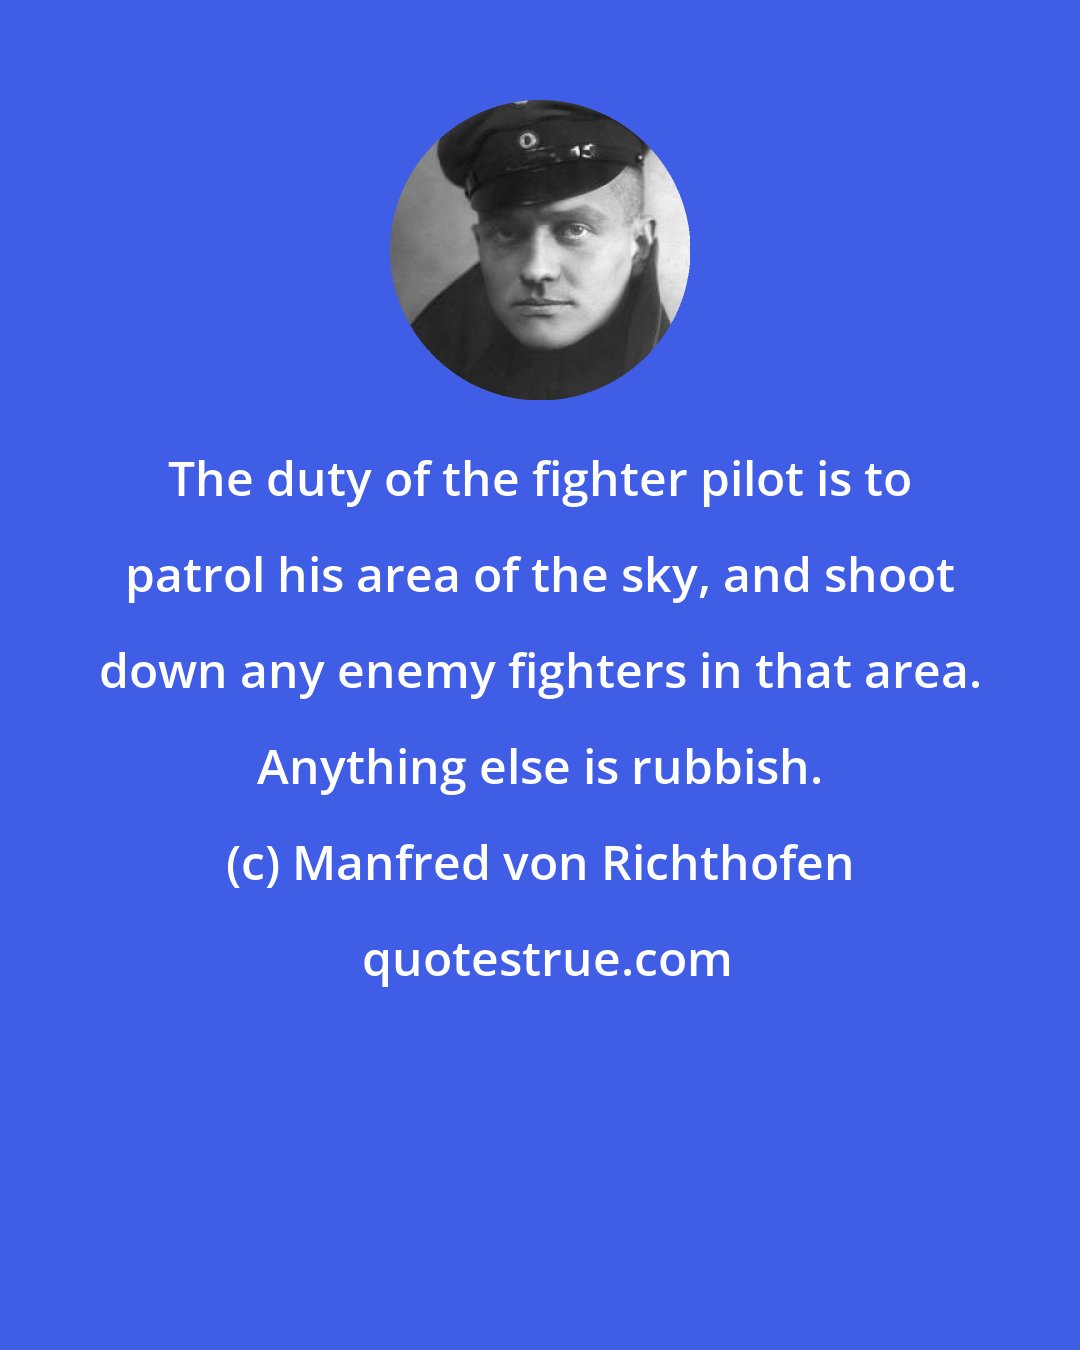 Manfred von Richthofen: The duty of the fighter pilot is to patrol his area of the sky, and shoot down any enemy fighters in that area. Anything else is rubbish.